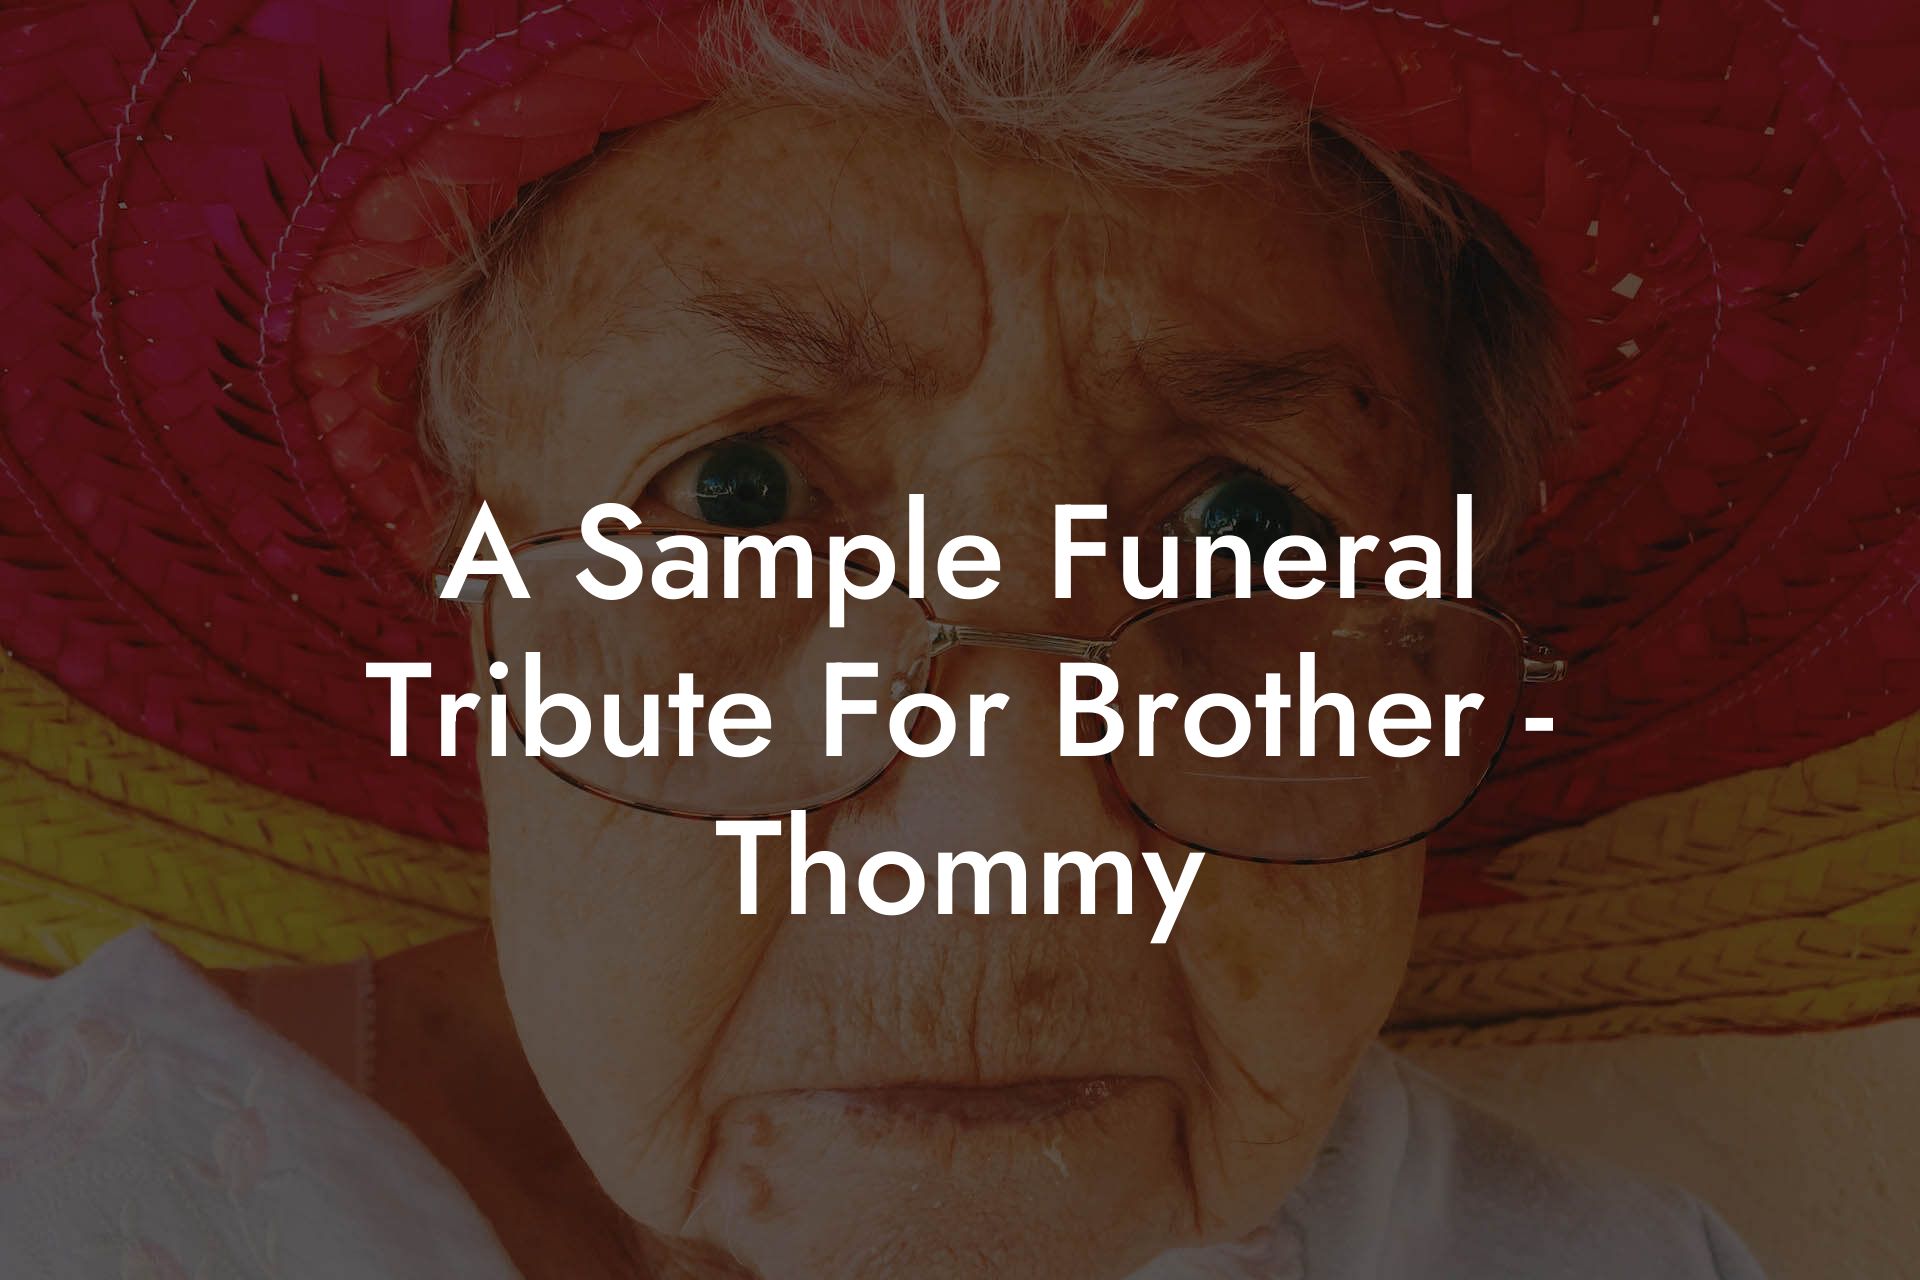 A Sample Funeral Tribute For Brother - Thommy